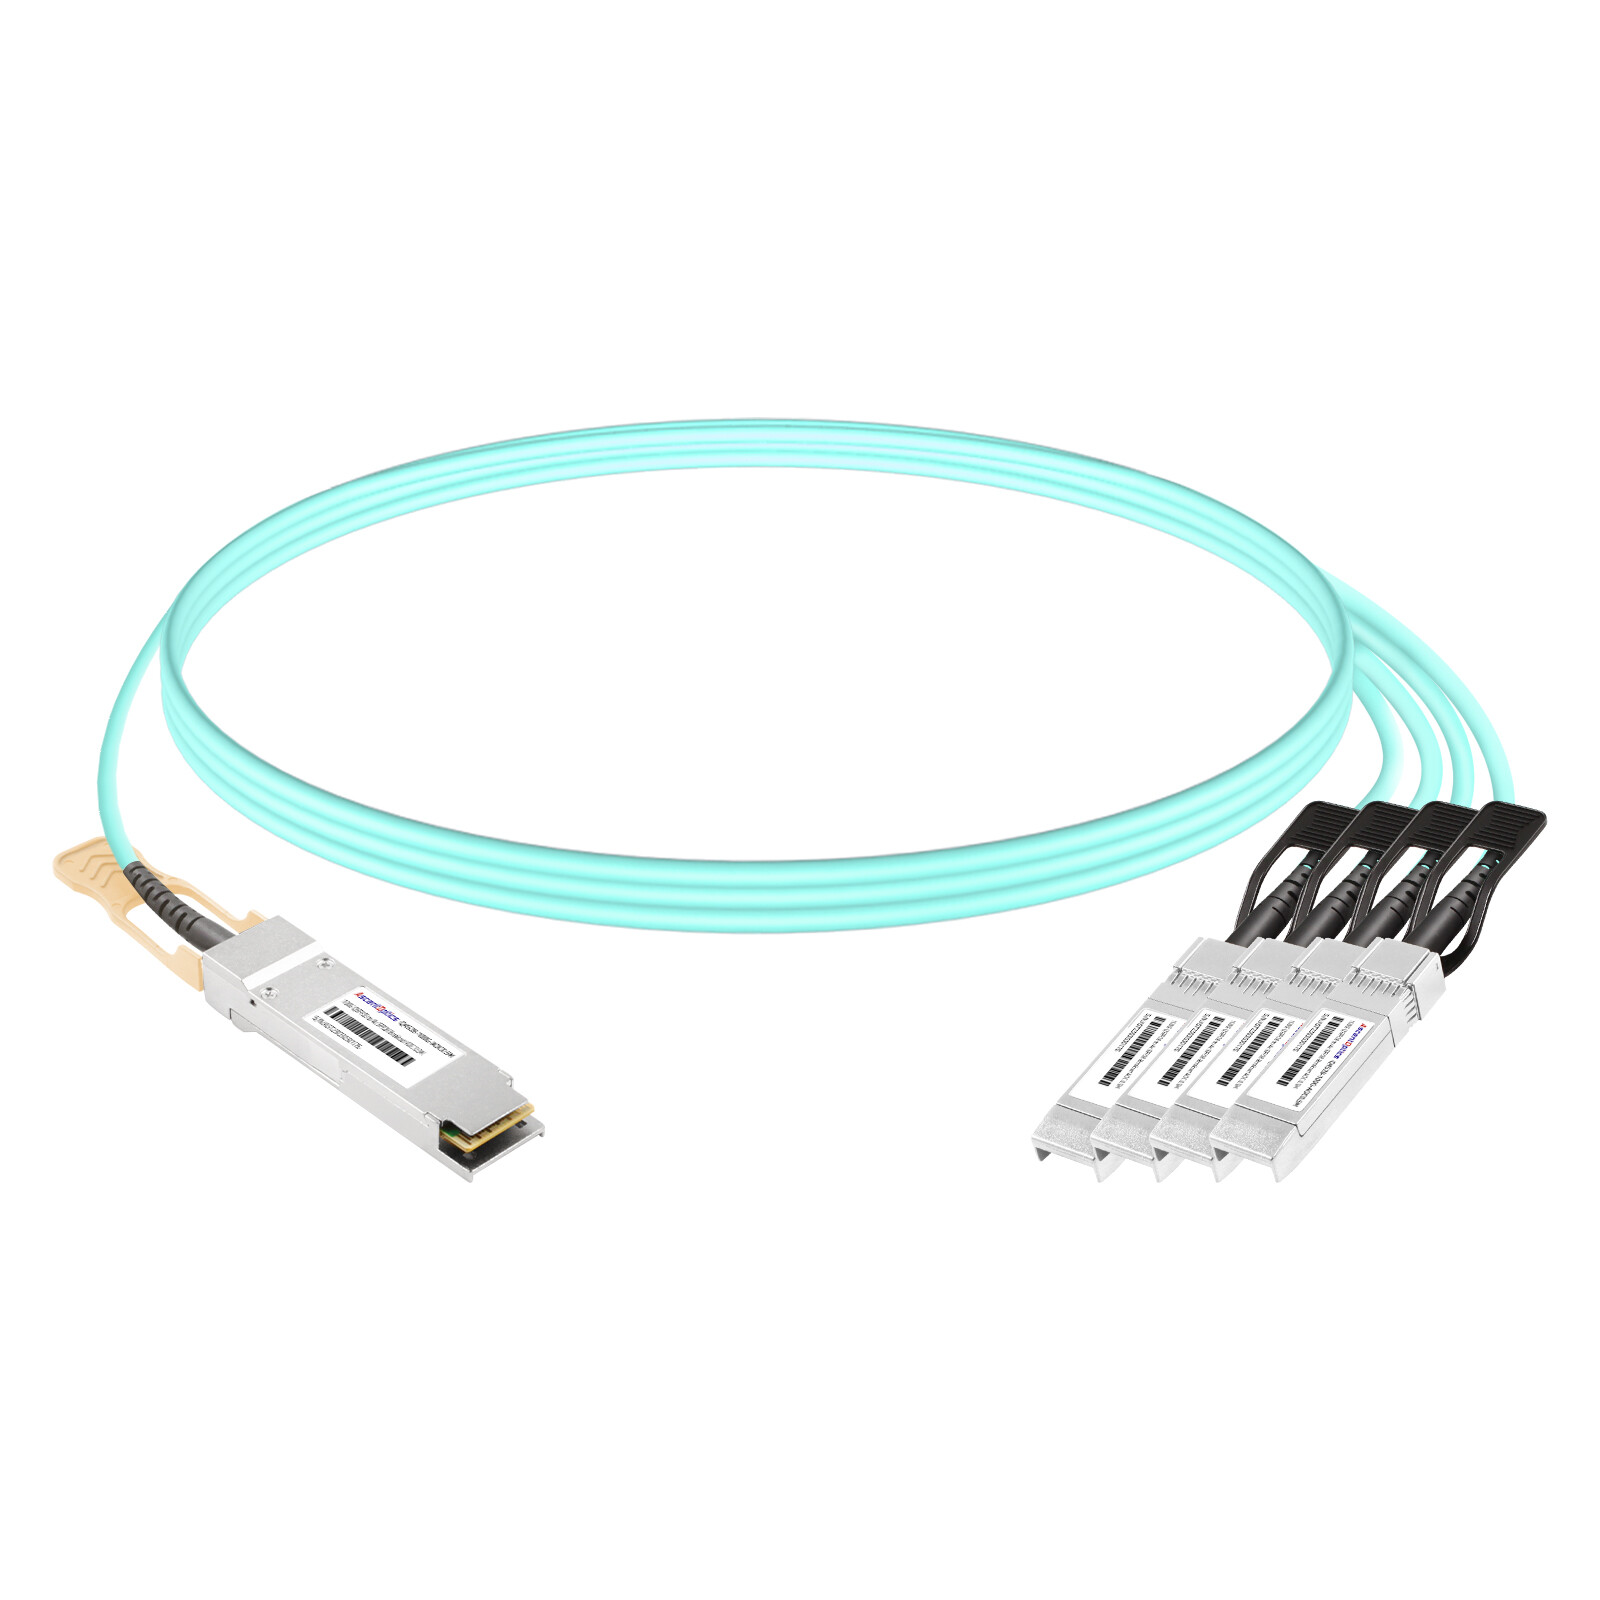 100G QSFP28 to 4x 25G SFP28 Breakout AOC Cable,xx Meter